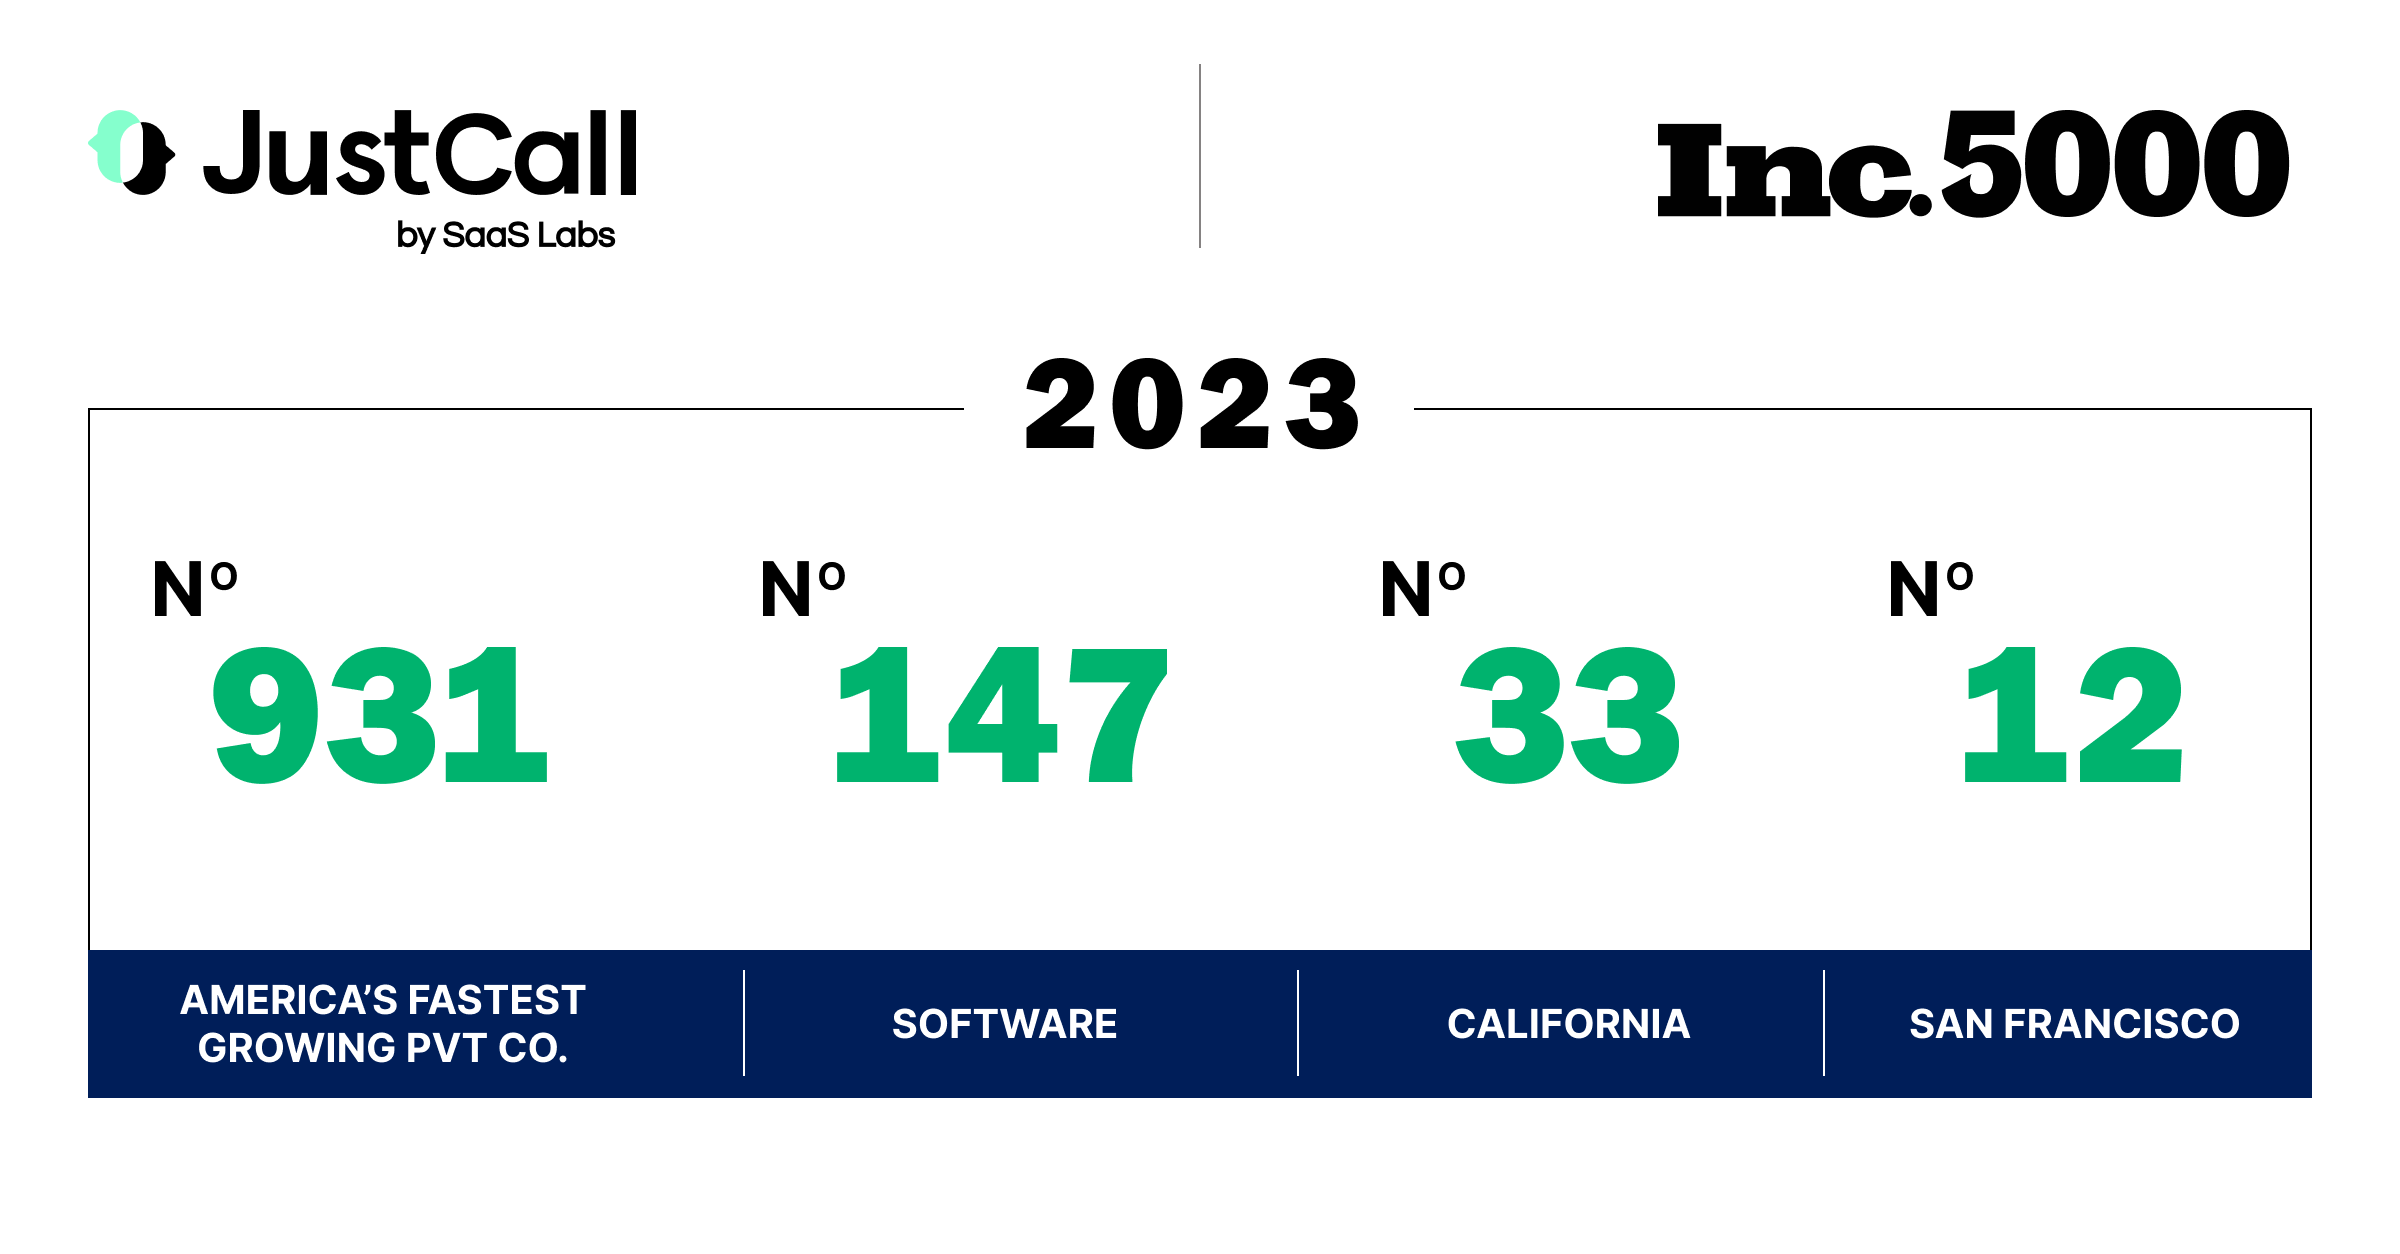 JustCall Debuts On The Inc. 5000 List Of Fastest-Growing Companies